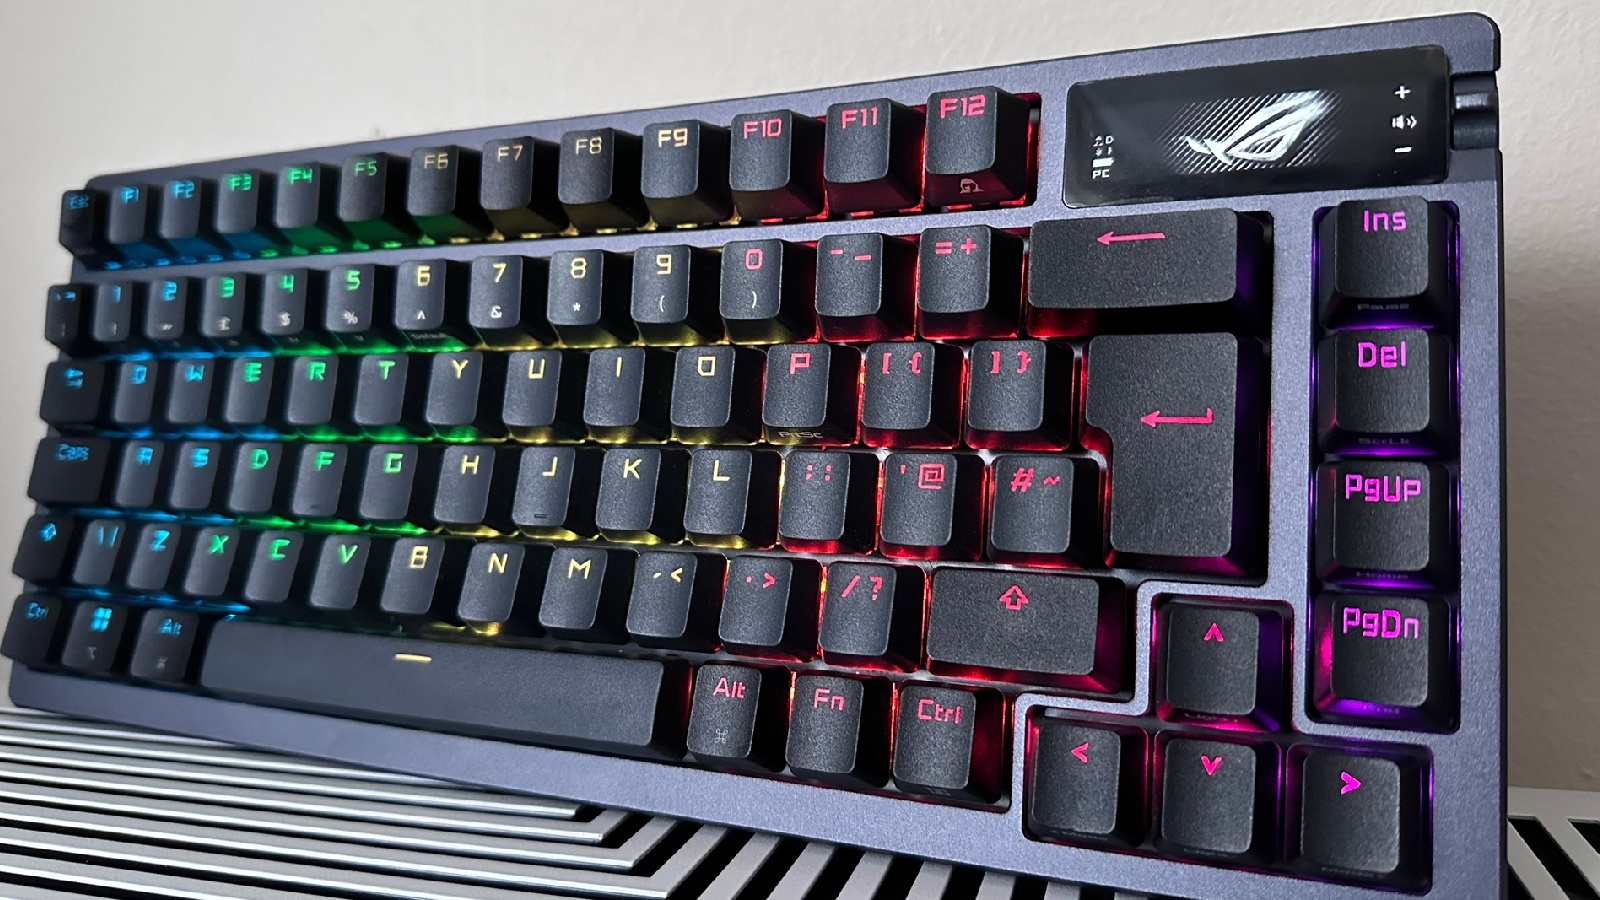 Asus ROG Ally returns to lowest-ever price in Best Buy deal - Dexerto